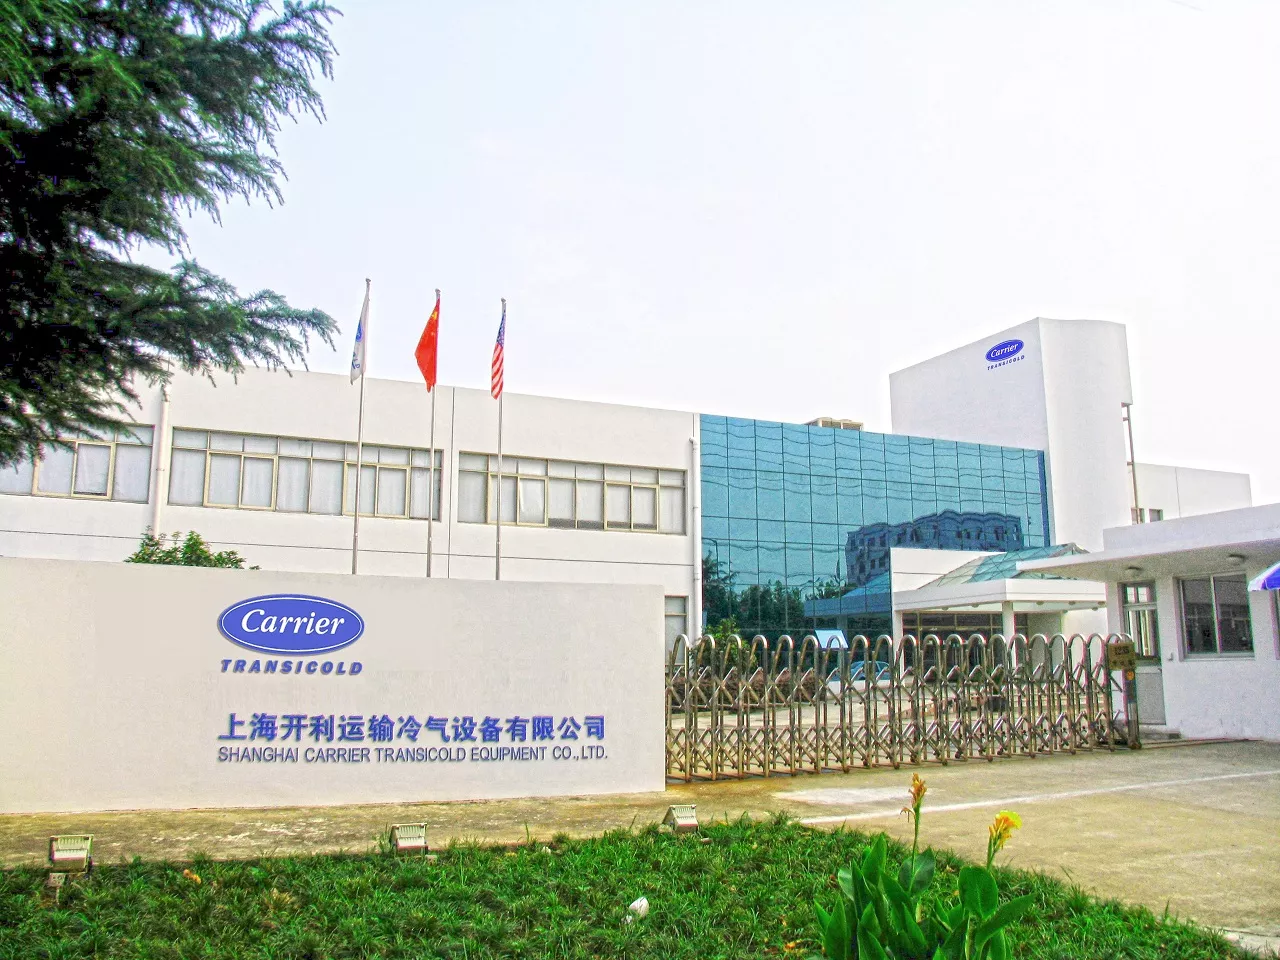 Carrier Transicold China Launches Two New Citimax Refrigeration Units